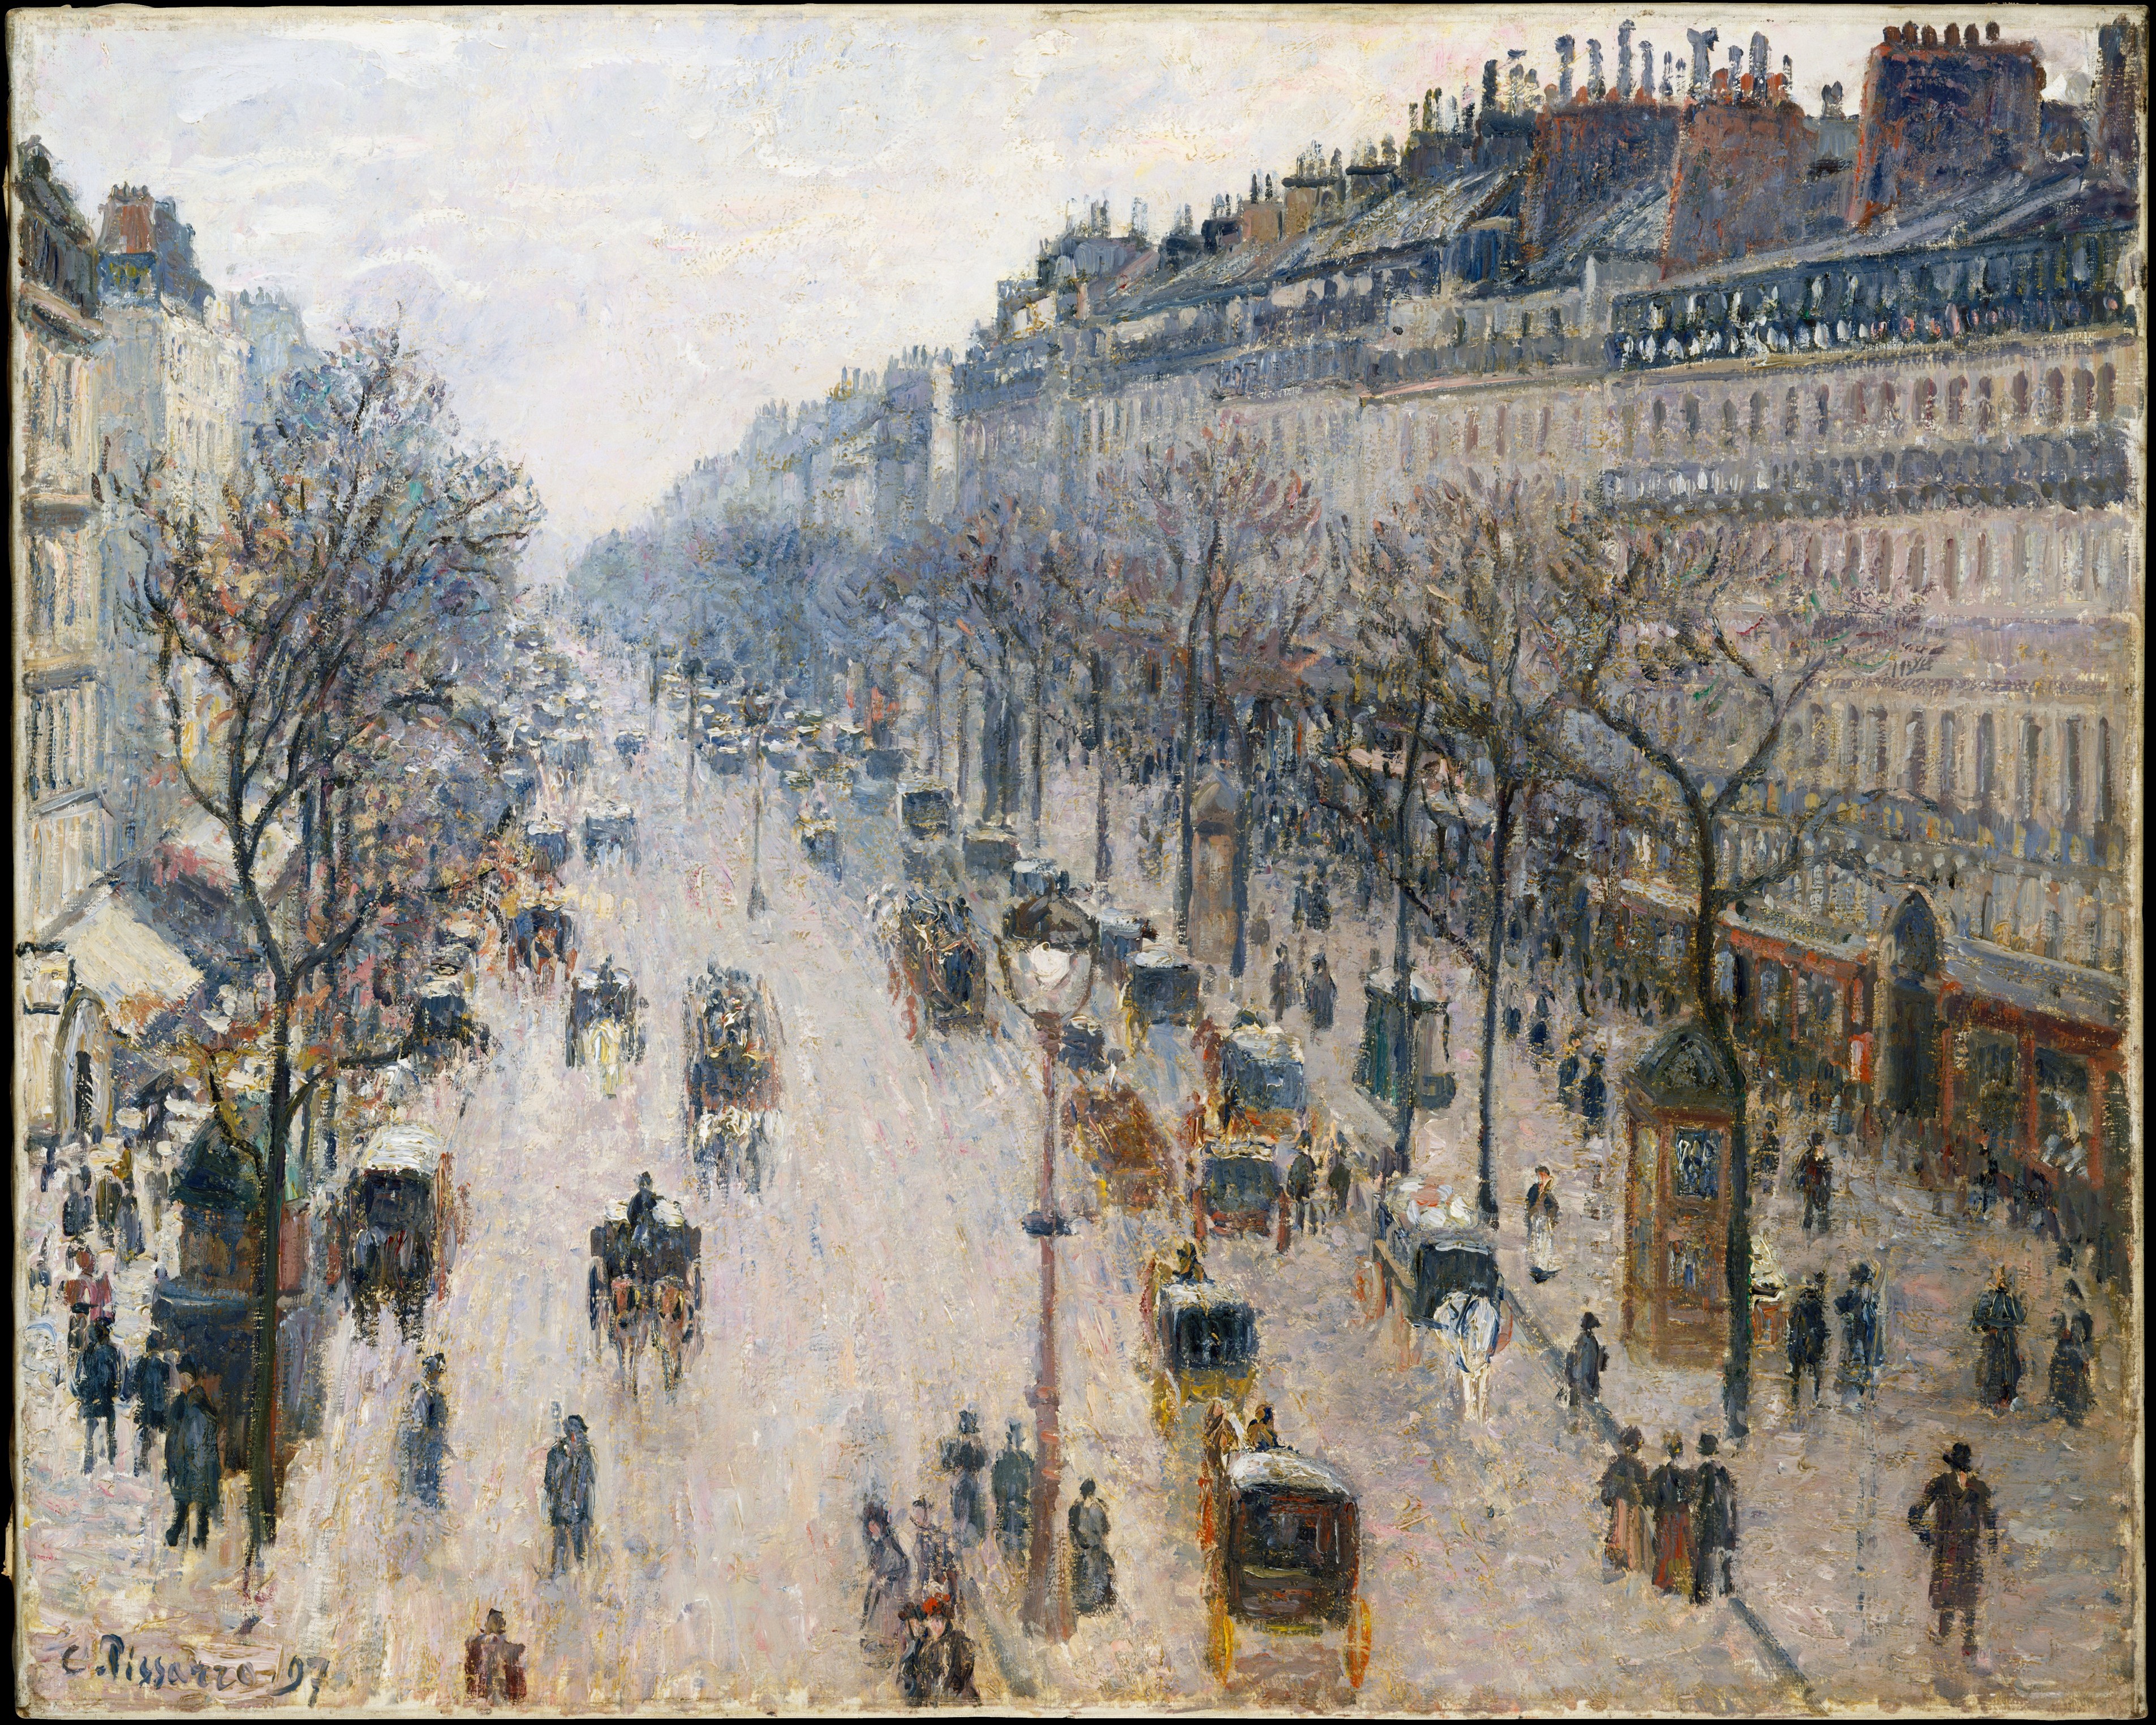 The Boulevard Montmartre on a Winter Morning by Camille Pissarro - 1897 - 64.8 x 81.3 cm Metropolitan Museum of Art